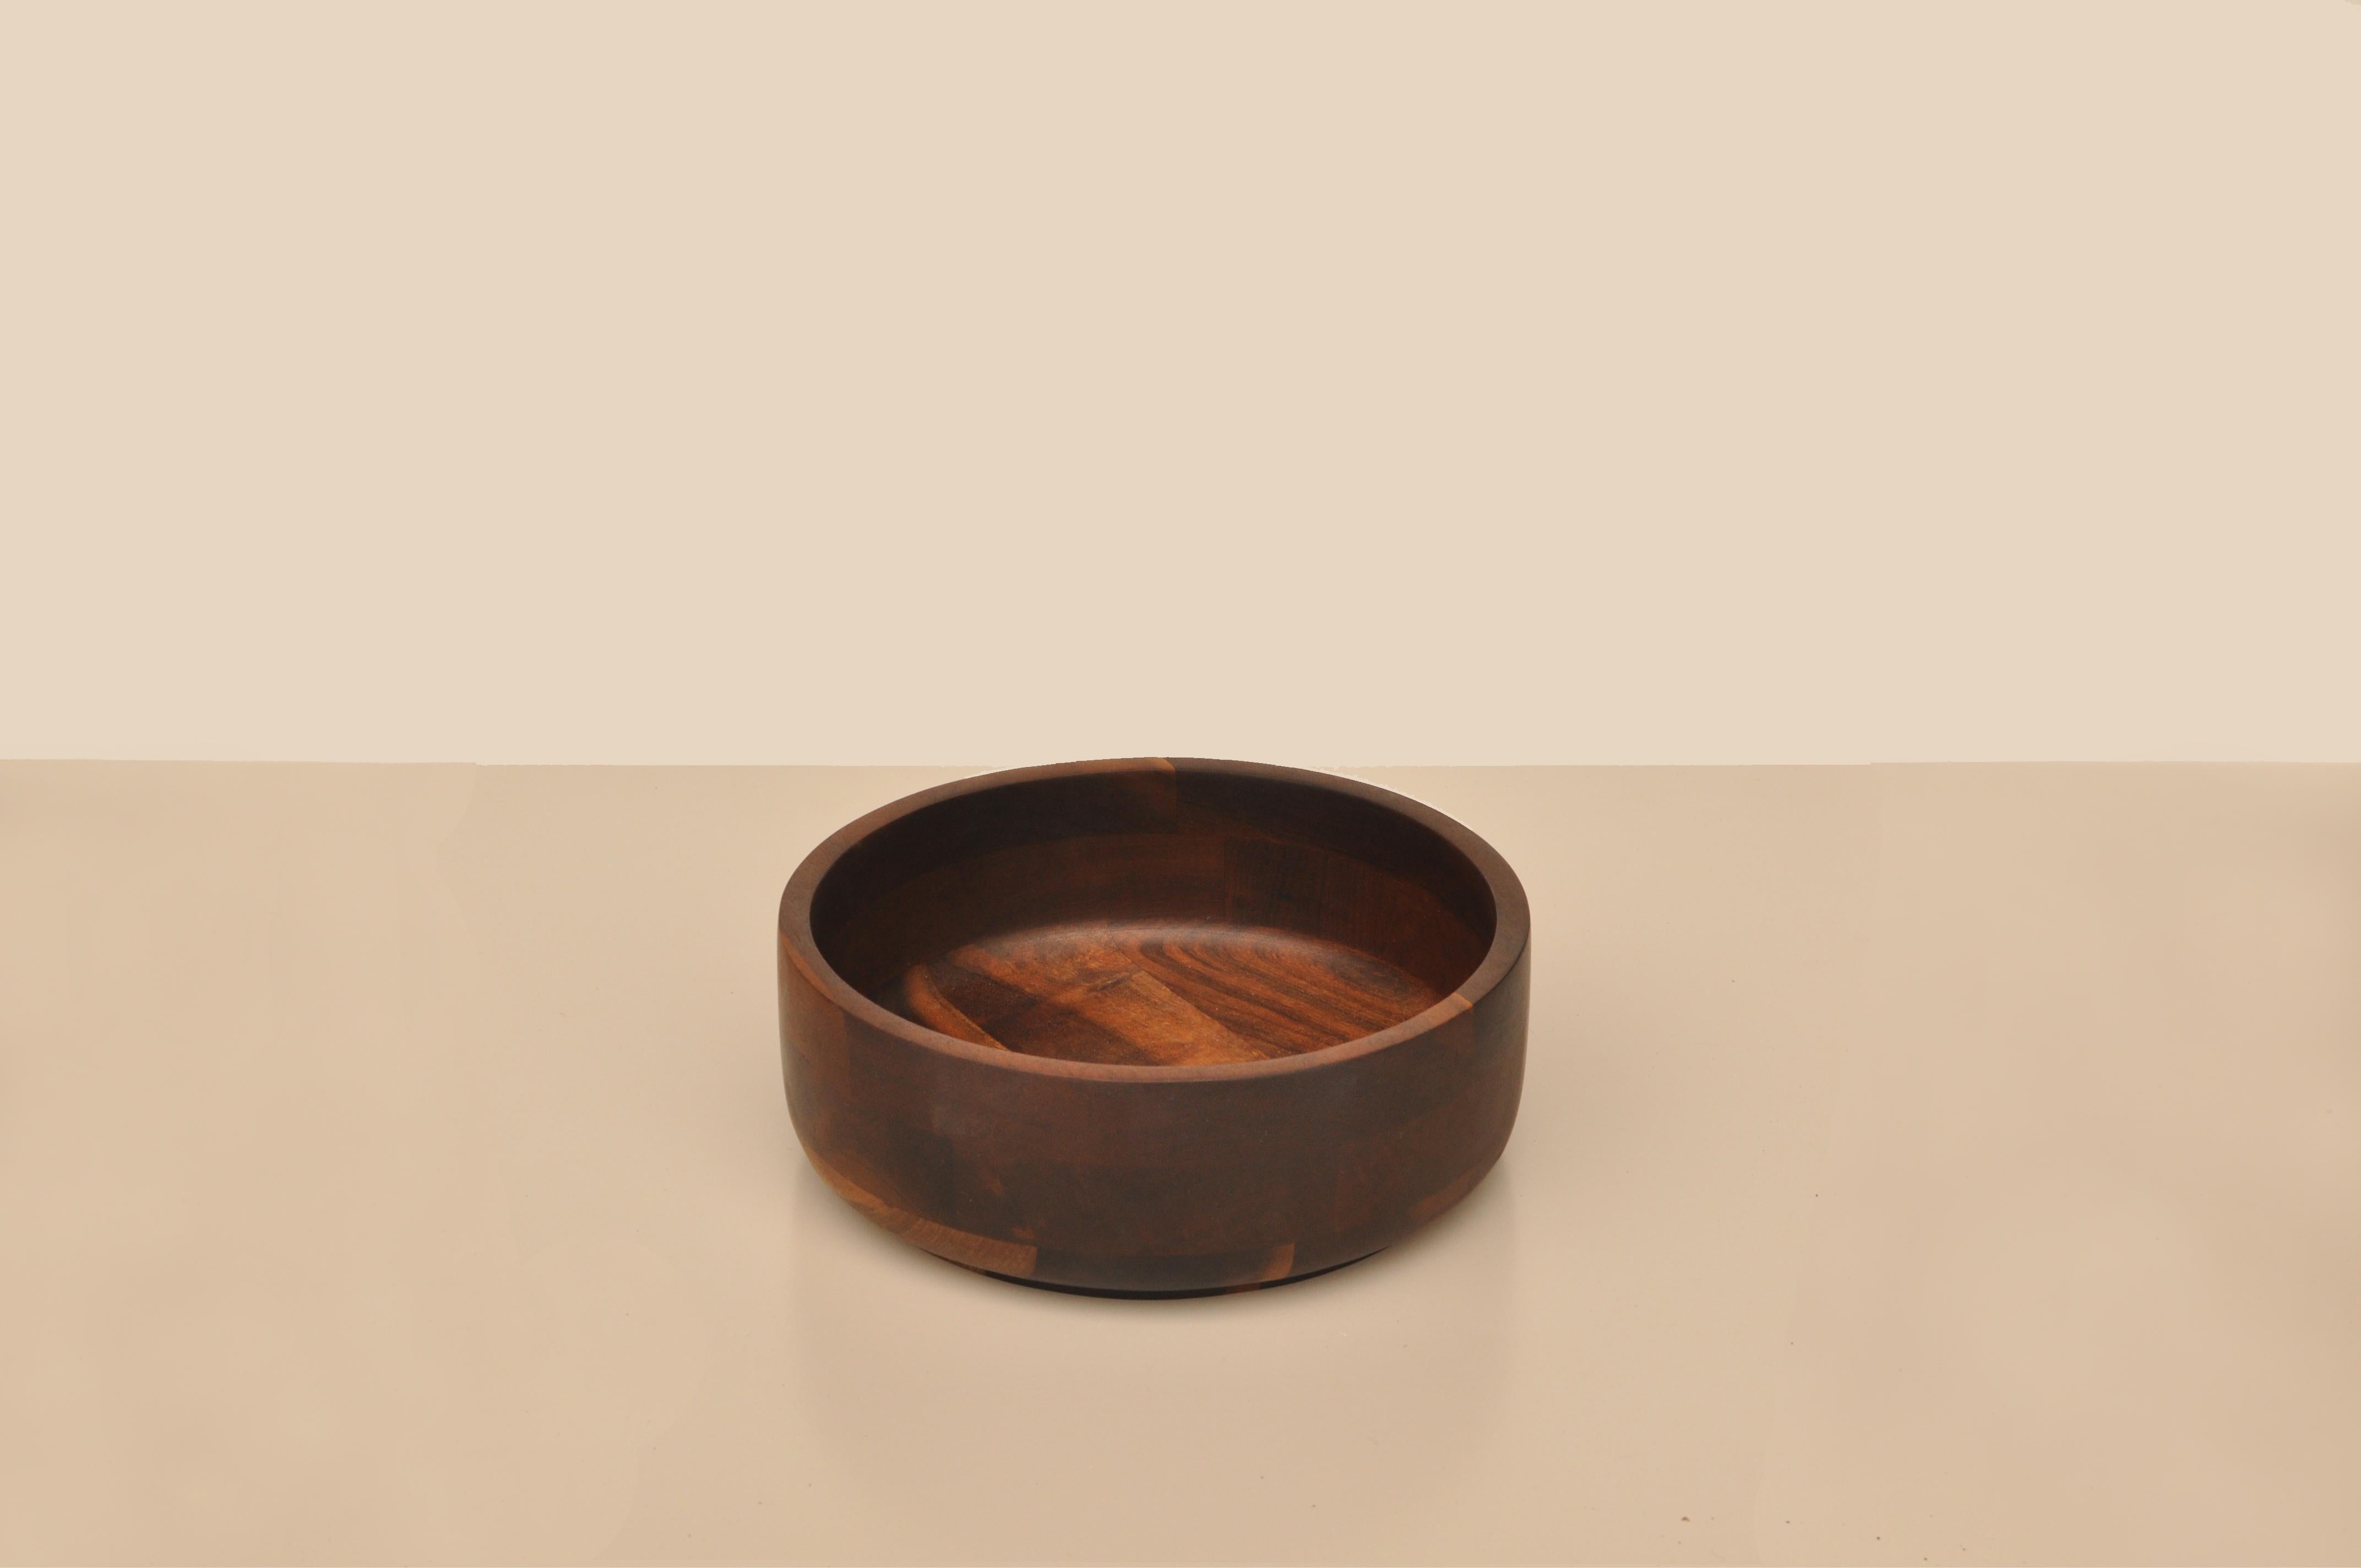 Brazilian mid-century wooden bowl in solid pieces of imbuia wood, designed by Jean Dobré for Tropic-Art. These pieces preserve the manufacturer's seal.

Tropic-Art manufactured in the middle of the last century on a large scale utilitarian pieces